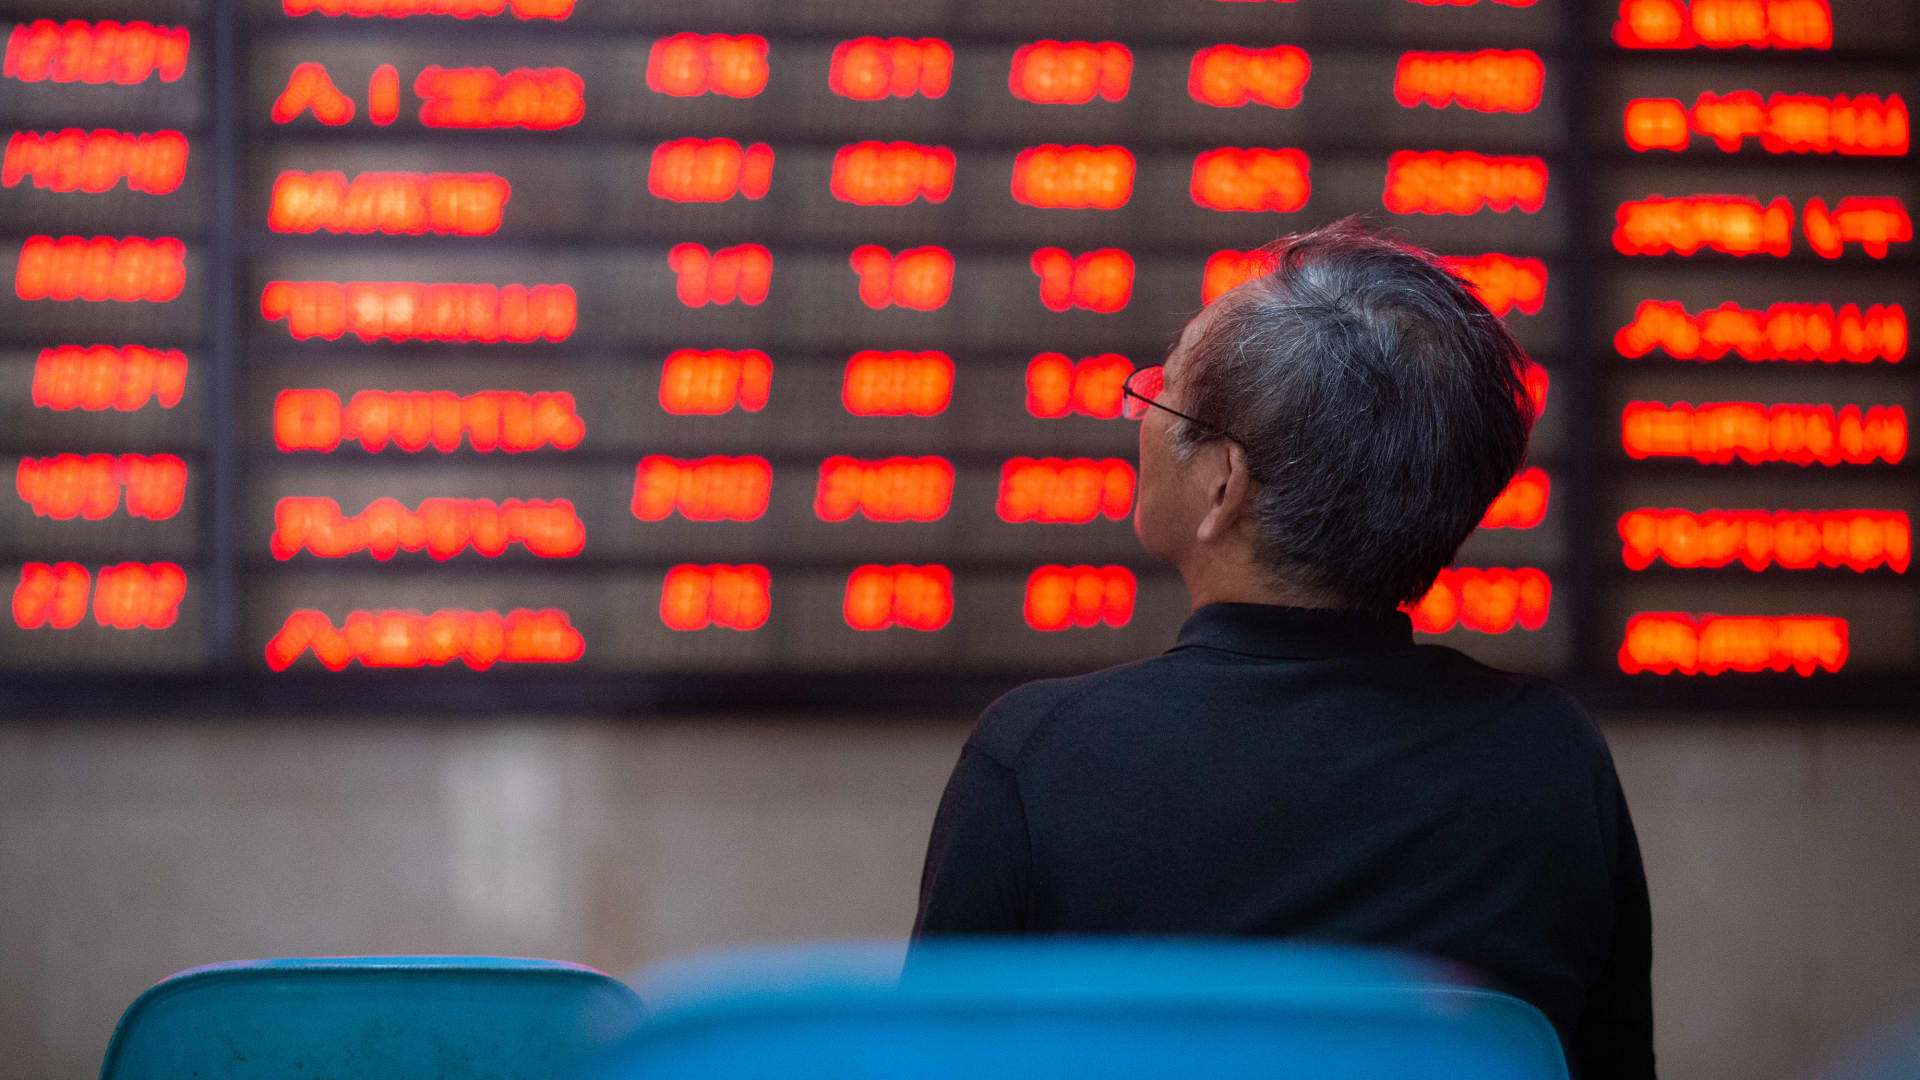 A shareholder watches the stock market in a securities business hall. Nanjing, Jiangsu Province, China, 6 July 2020.